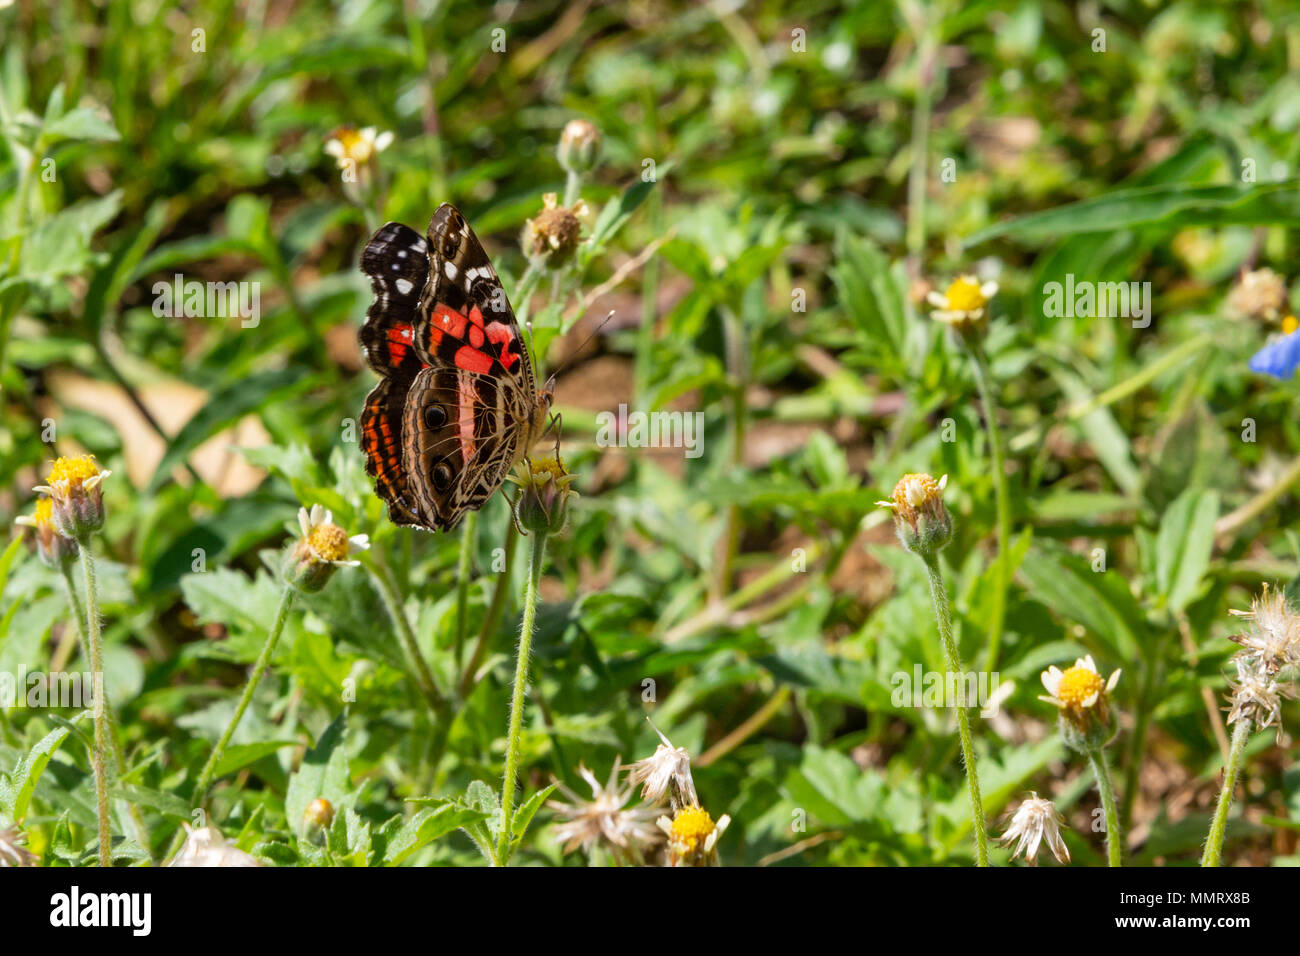 Asuncion, Paraguay. 12th May, 2018. A vivid painted lady or banded lady (Vanessa myrinna) butterfly feeds the nectar of tridax daisy or coatbuttons (Tridax procumbens) blooming flower during a sunny and pleasant afternoon with temperatures high around 25°C in Asuncion, Paraguay. Credit: Andre M. Chang/ARDUOPRESS/Alamy Live News Stock Photo